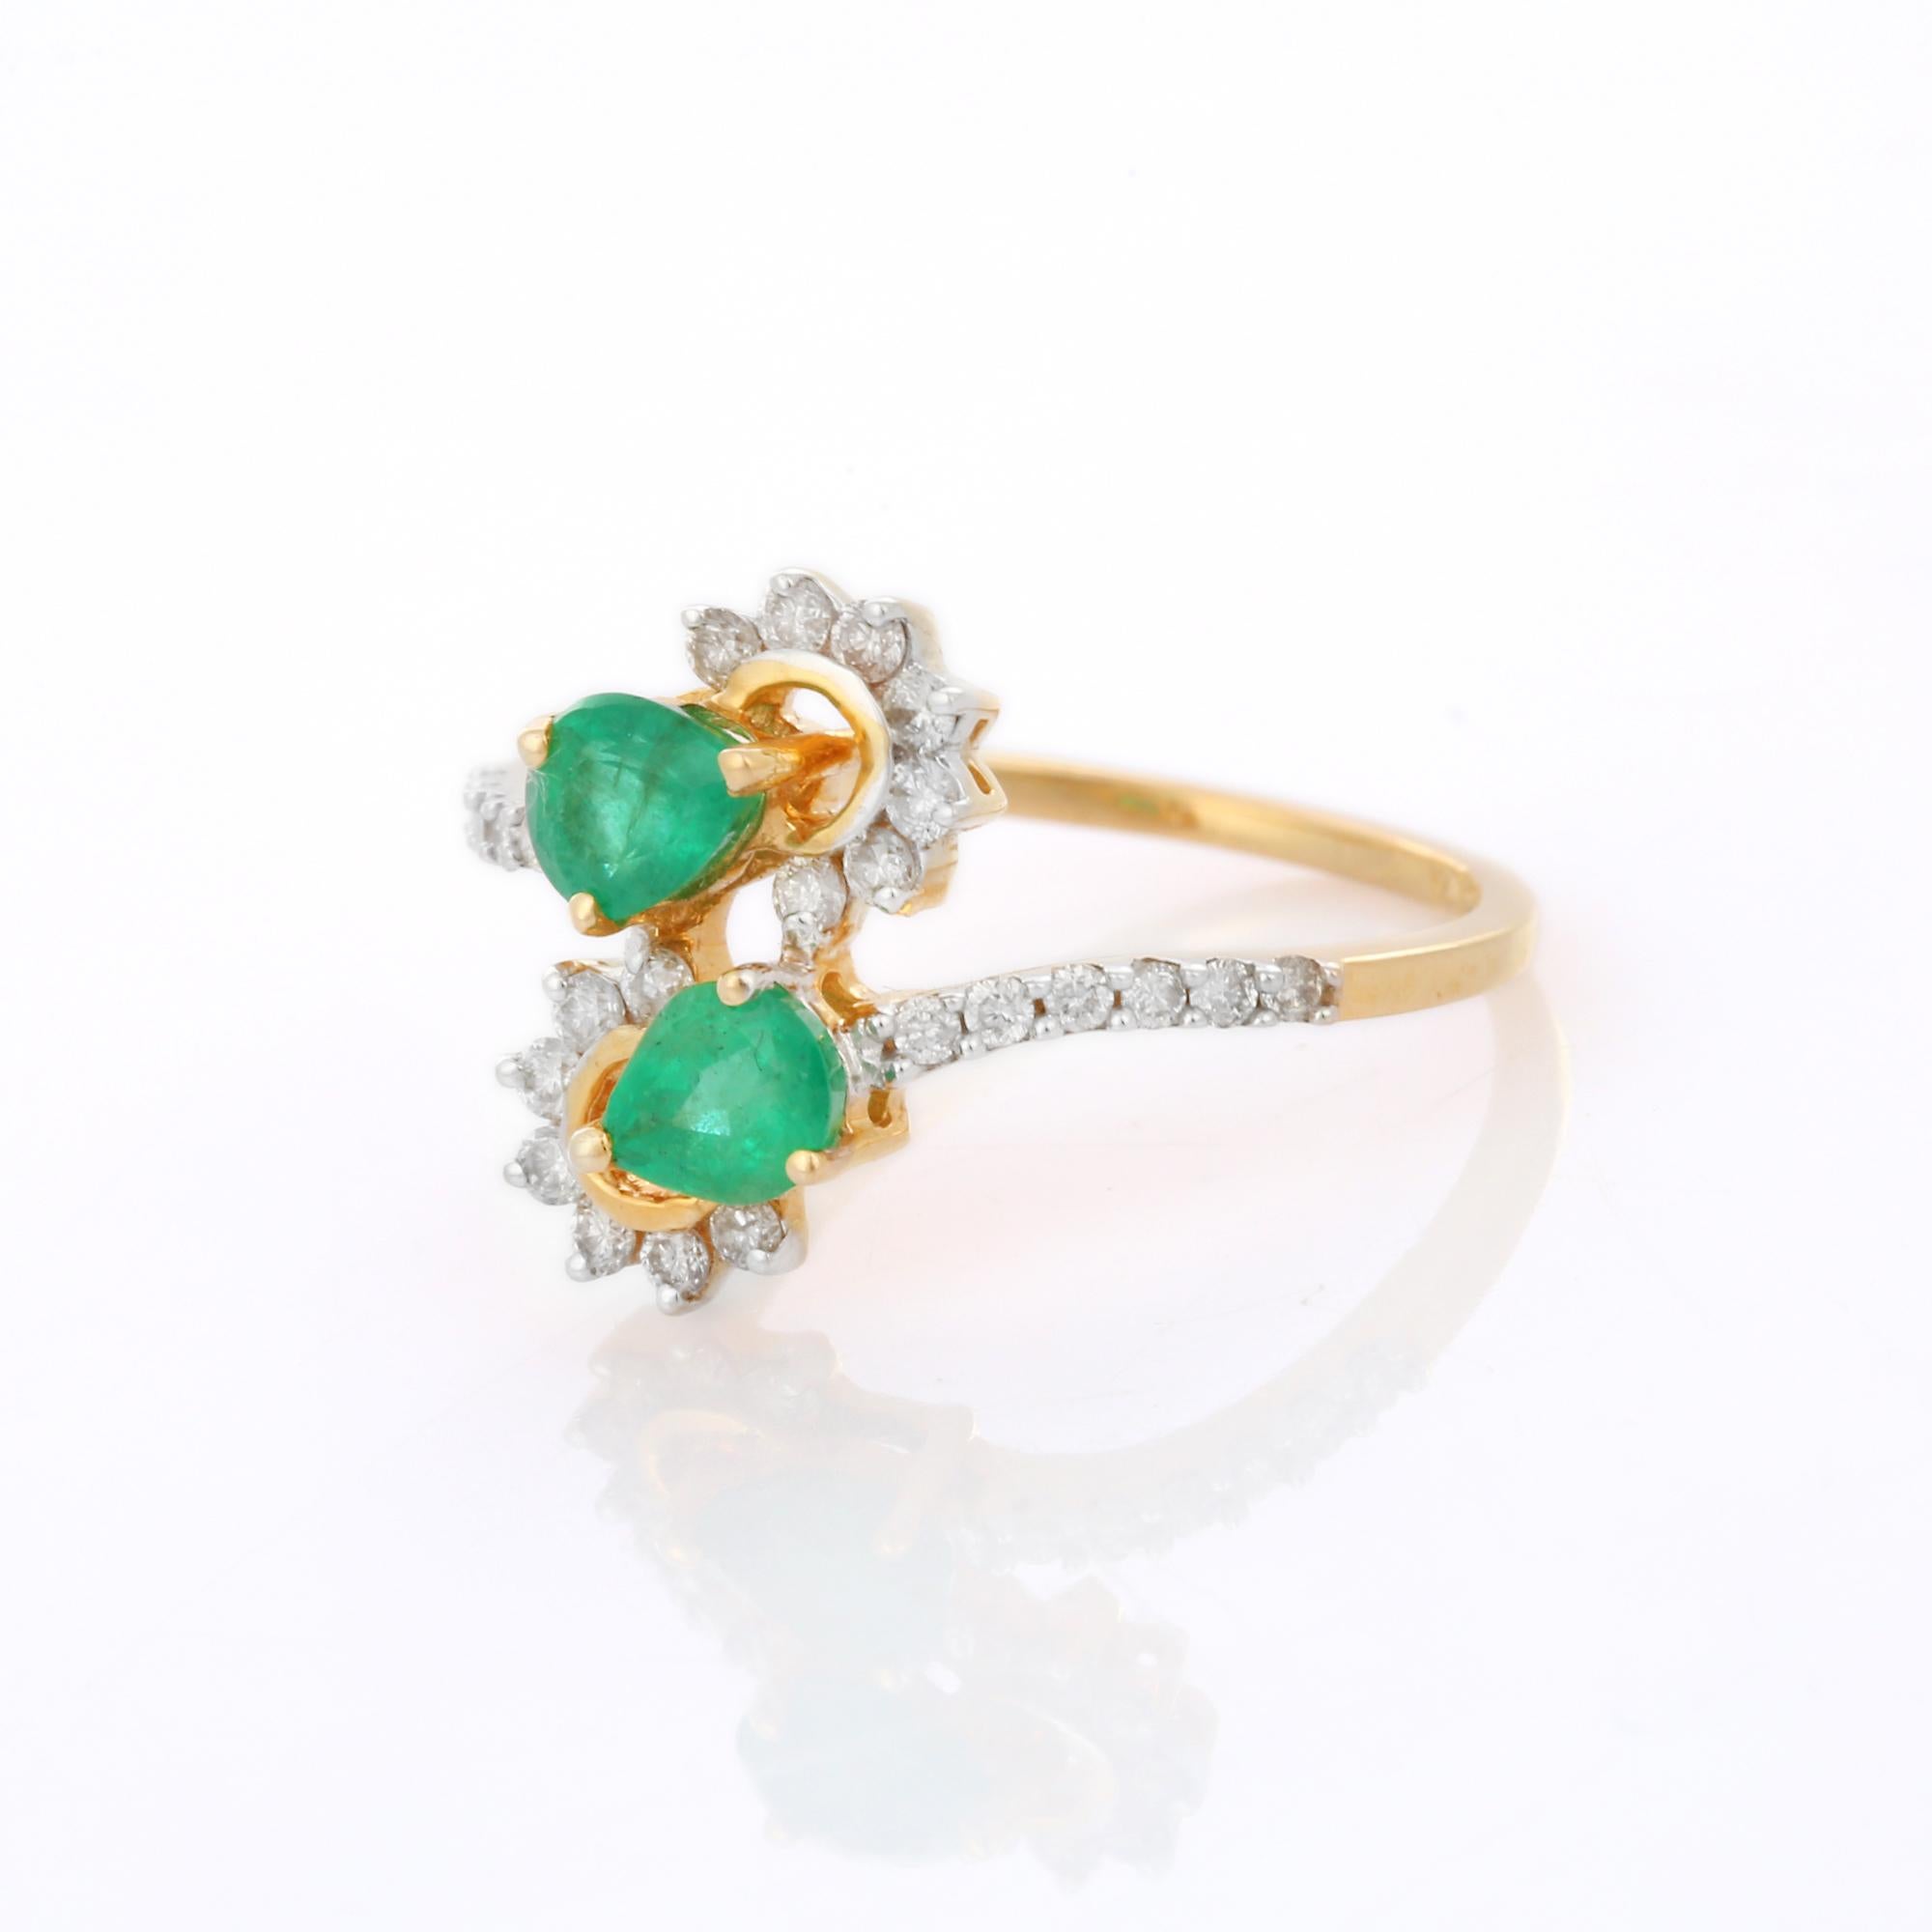 For Sale:  Exquisite Pear Cut Emerald and Diamond Open Ring in 18K Yellow Gold for Her 3